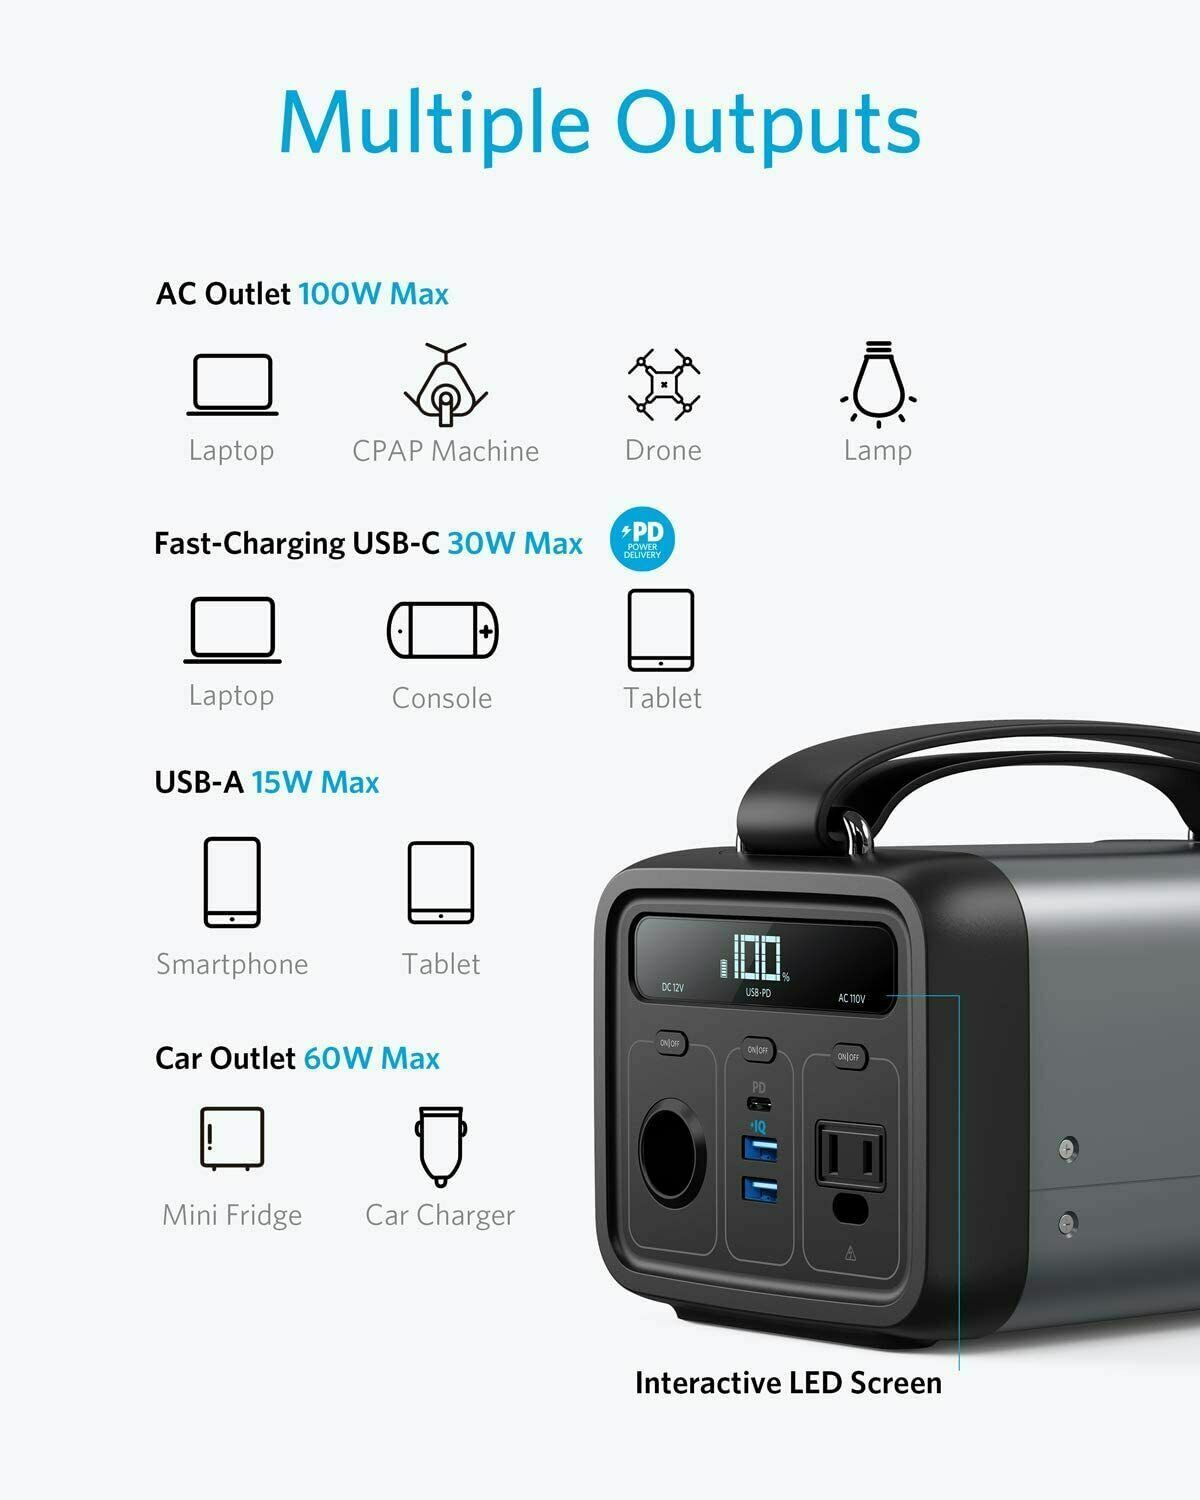 NEW Anker Powerhouse 200, 213Wh/57600mAh Portable Rechargeable Generator  Clean